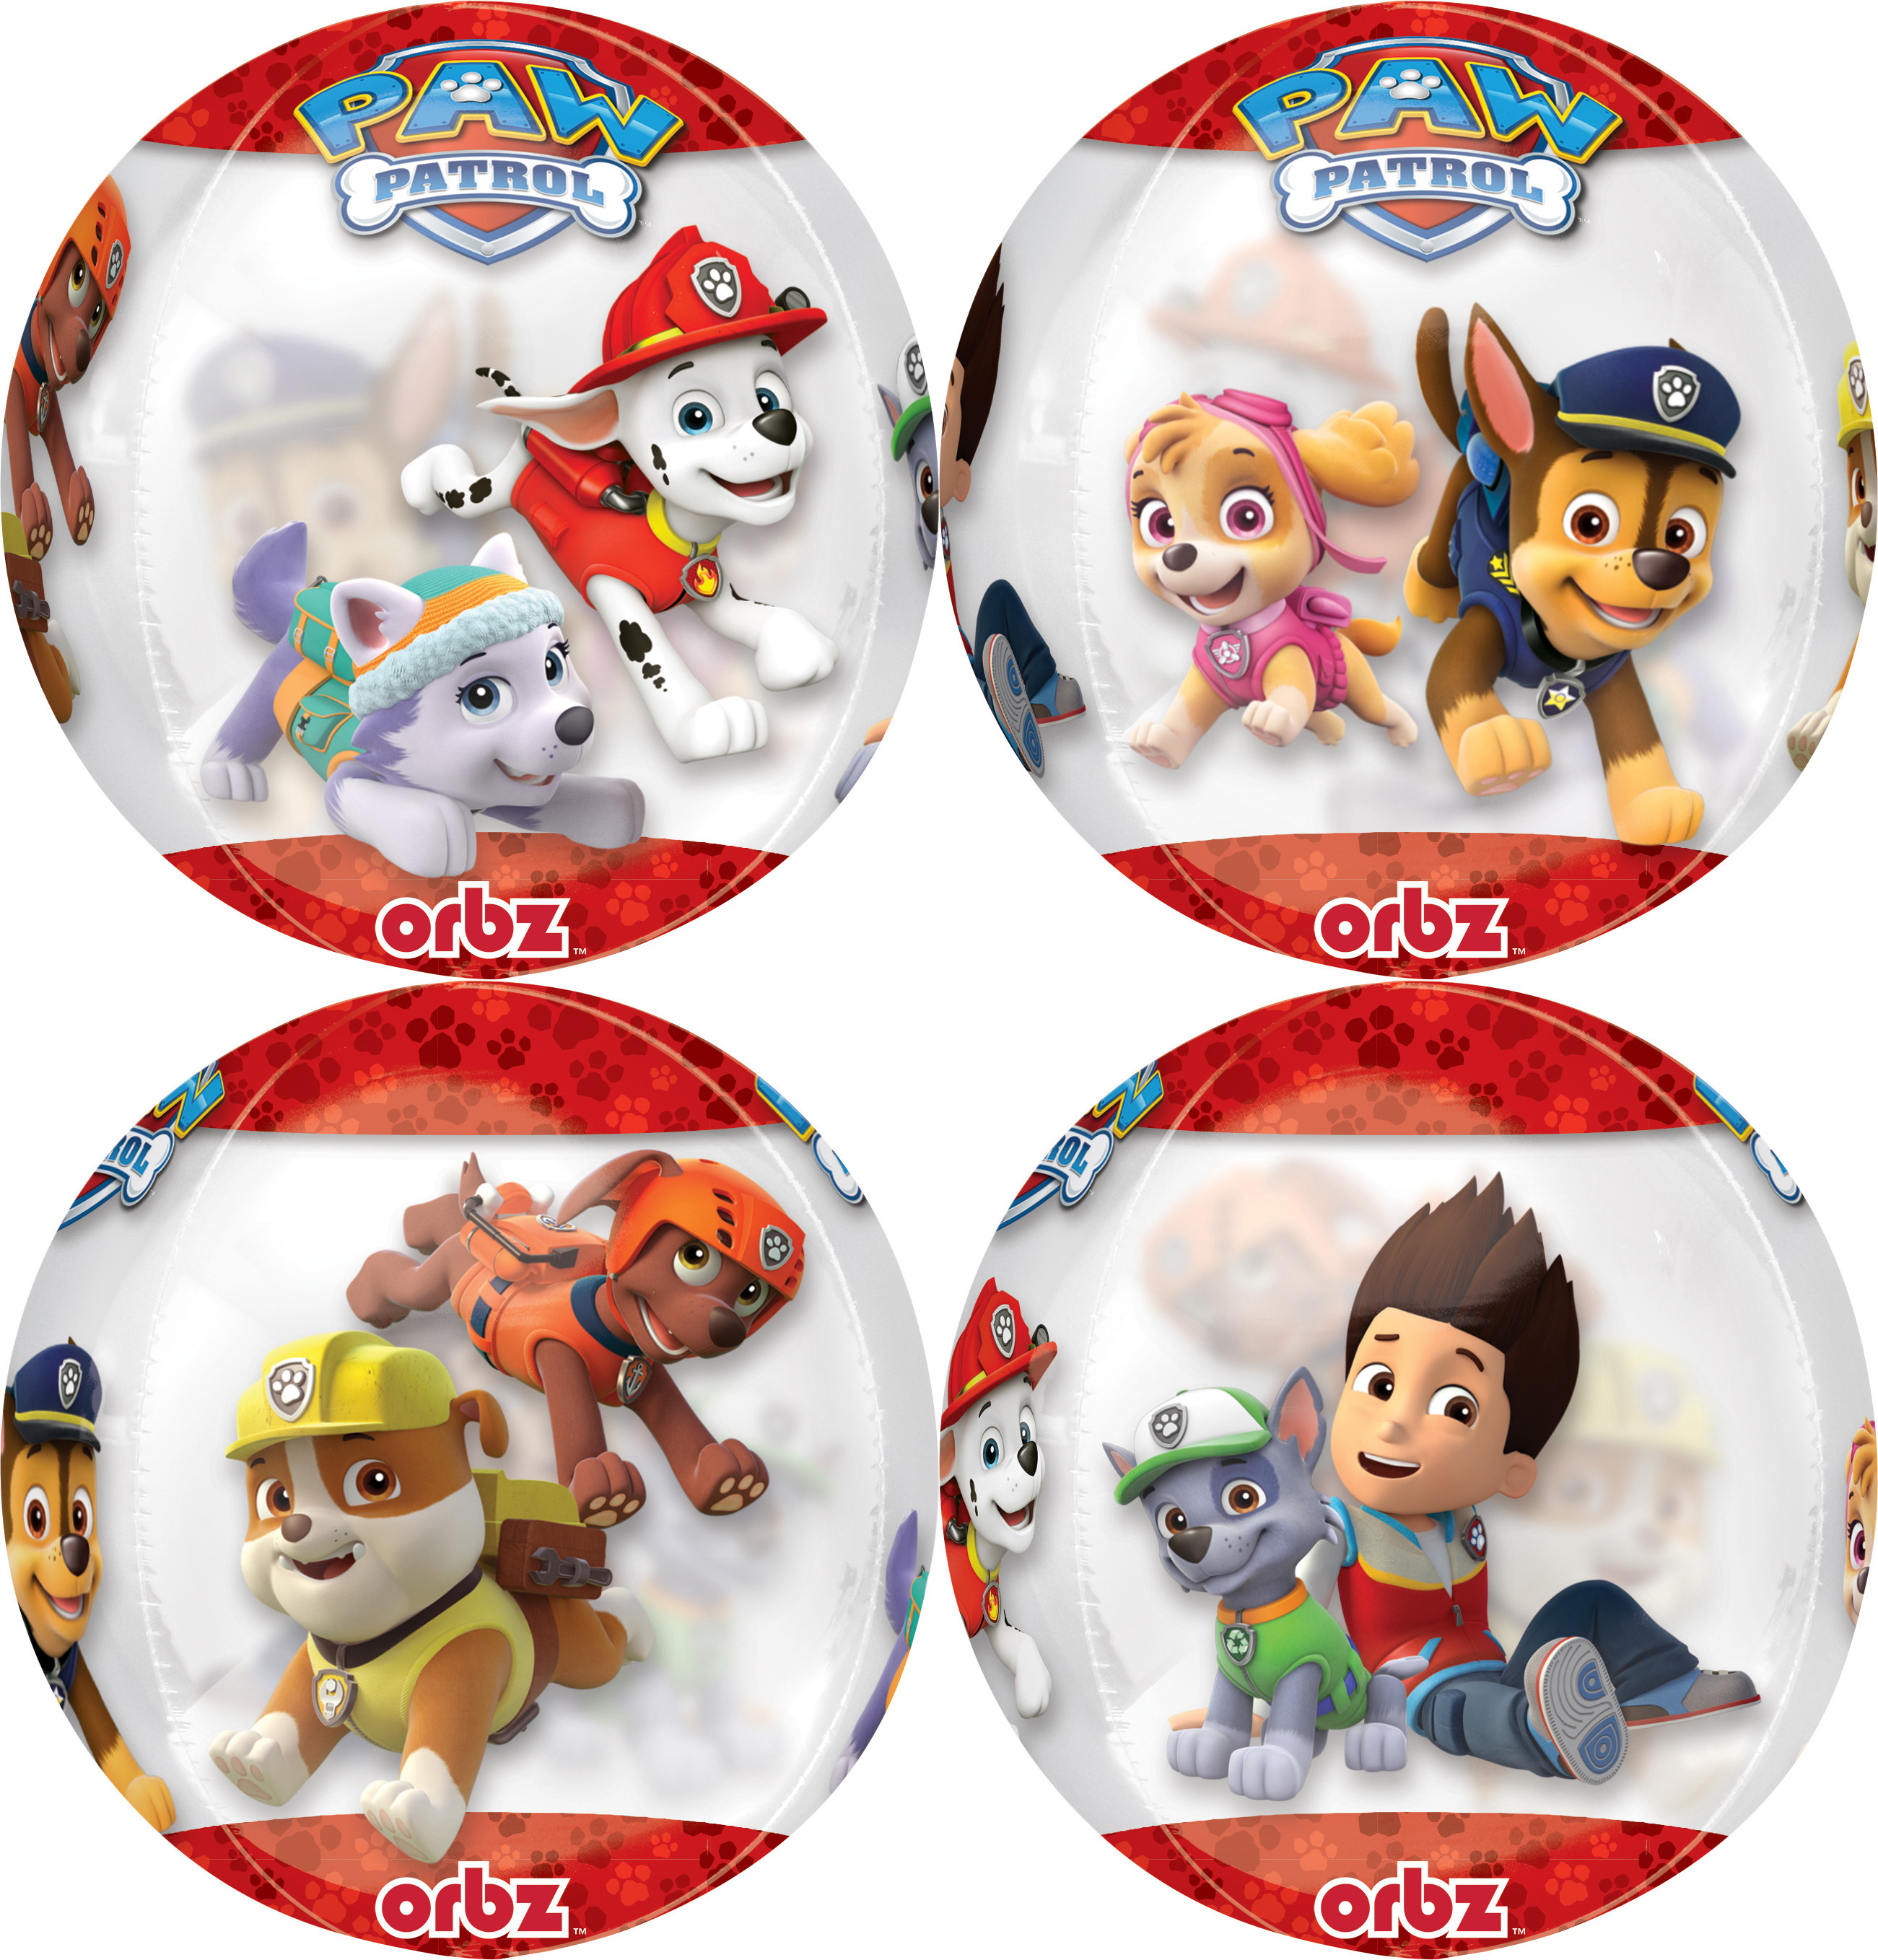 Details about  / Paw Patrol CHASE MARSHALL RUBBLE Kids Party foil Birthday Balloon